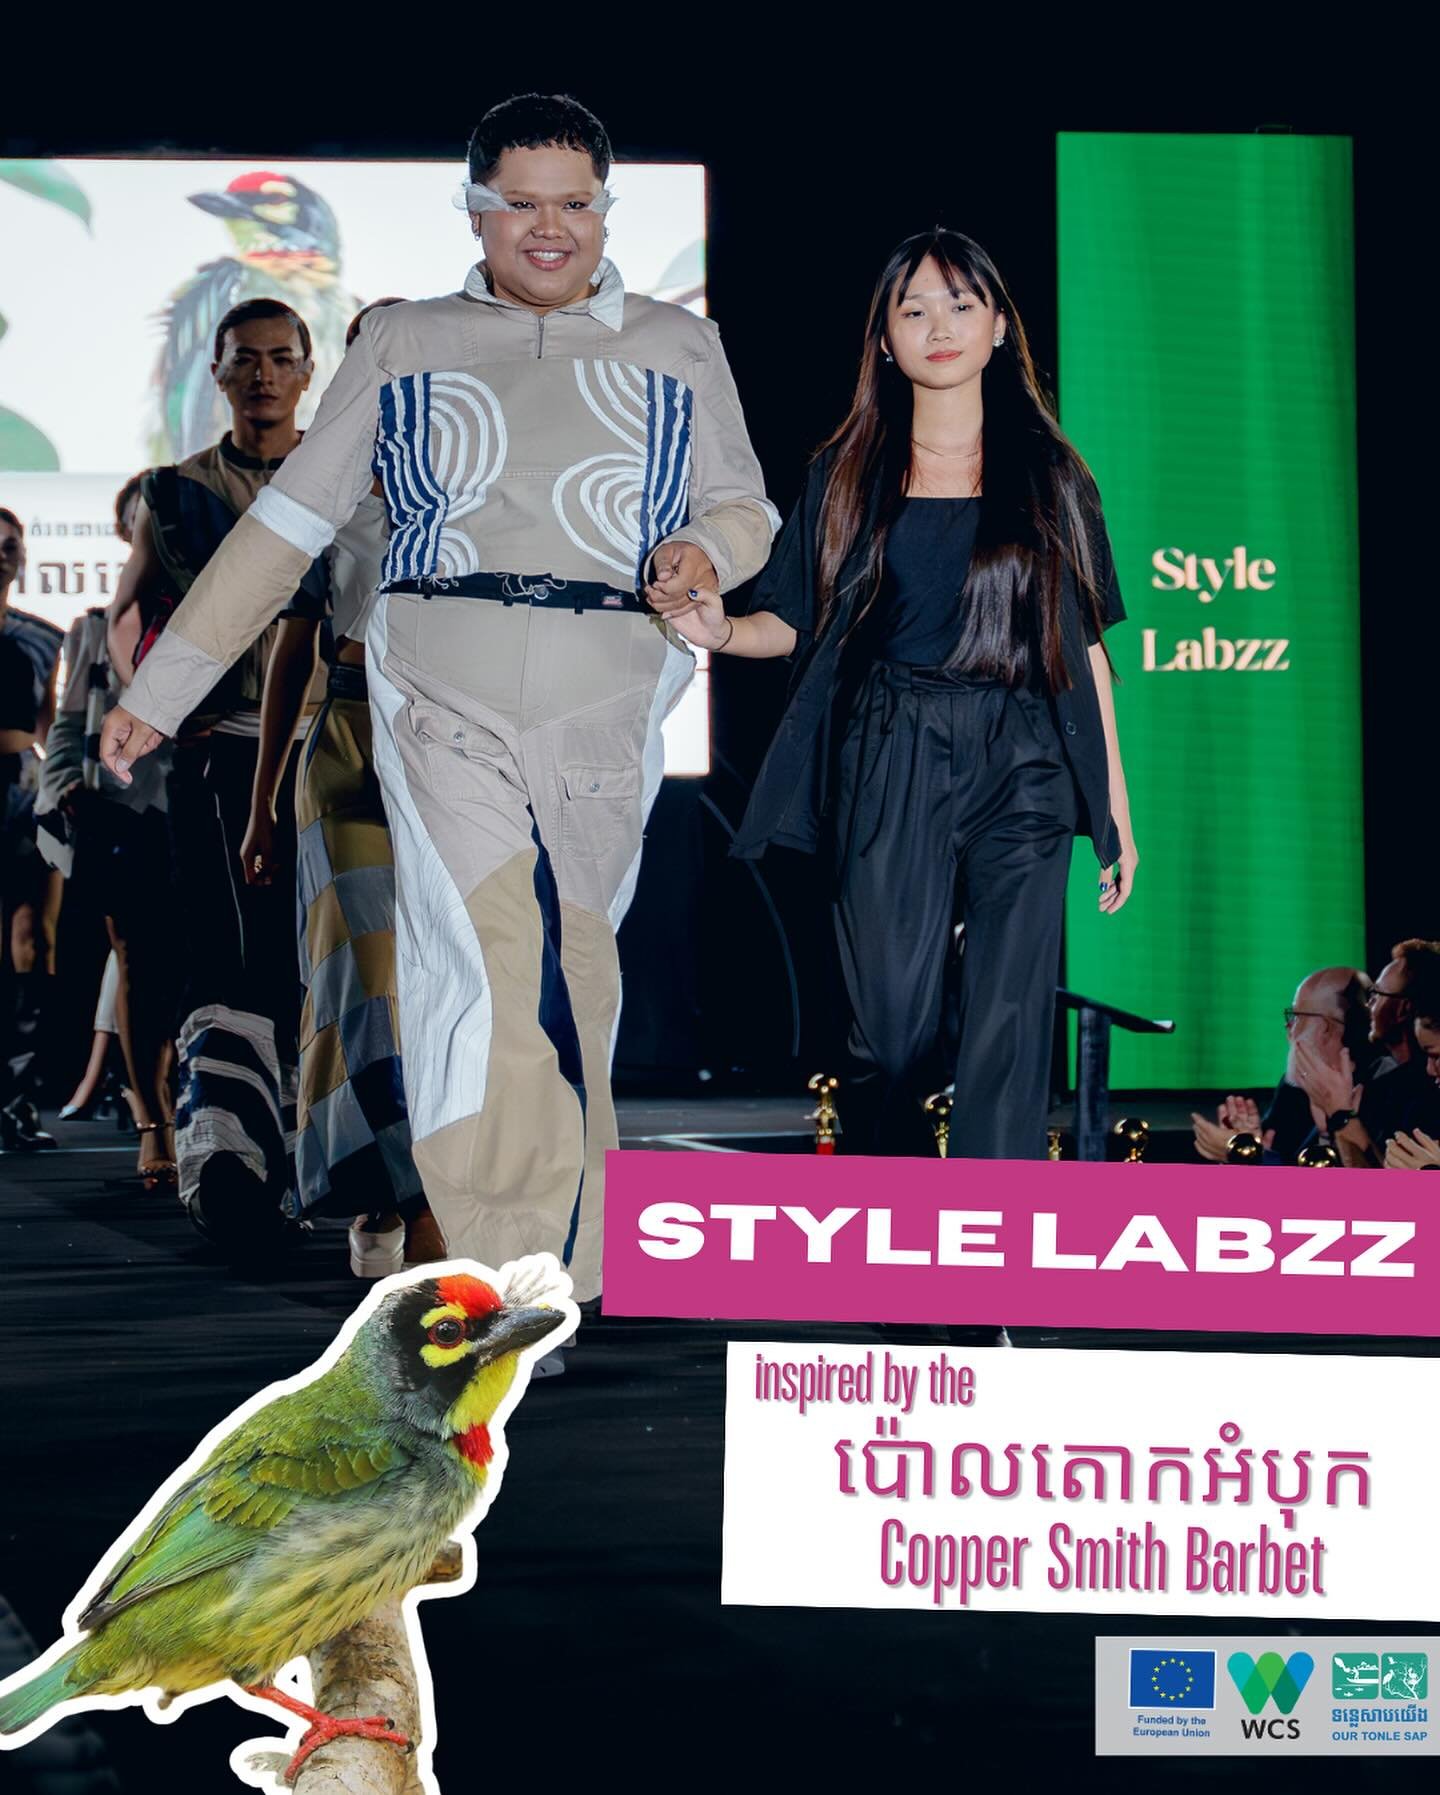 Did you know the @stylelabzz collection draws its inspiration from the colorful Copper Smith Barbet? 🐦✨ These charming birds can be found in towns and countrysides around the Tonle Sap Lake. 🍃

🙏 A big thank you to our sponsor, the @europeanunion 